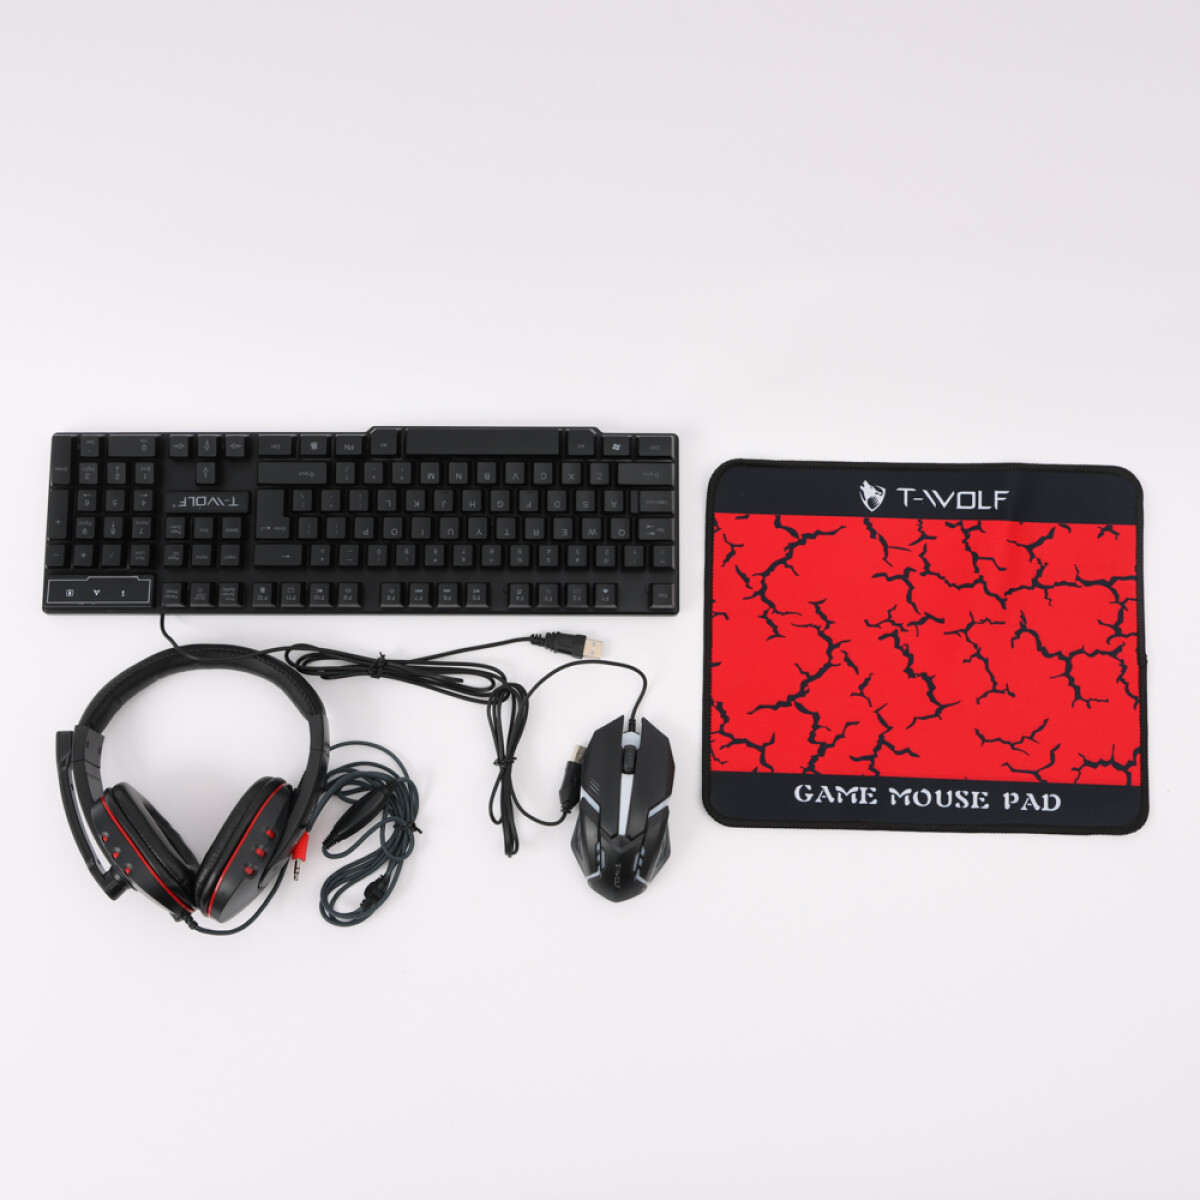 Combo Gamer Mouse, Teclado, Auriculares Y Paño Twolf - Tf800 